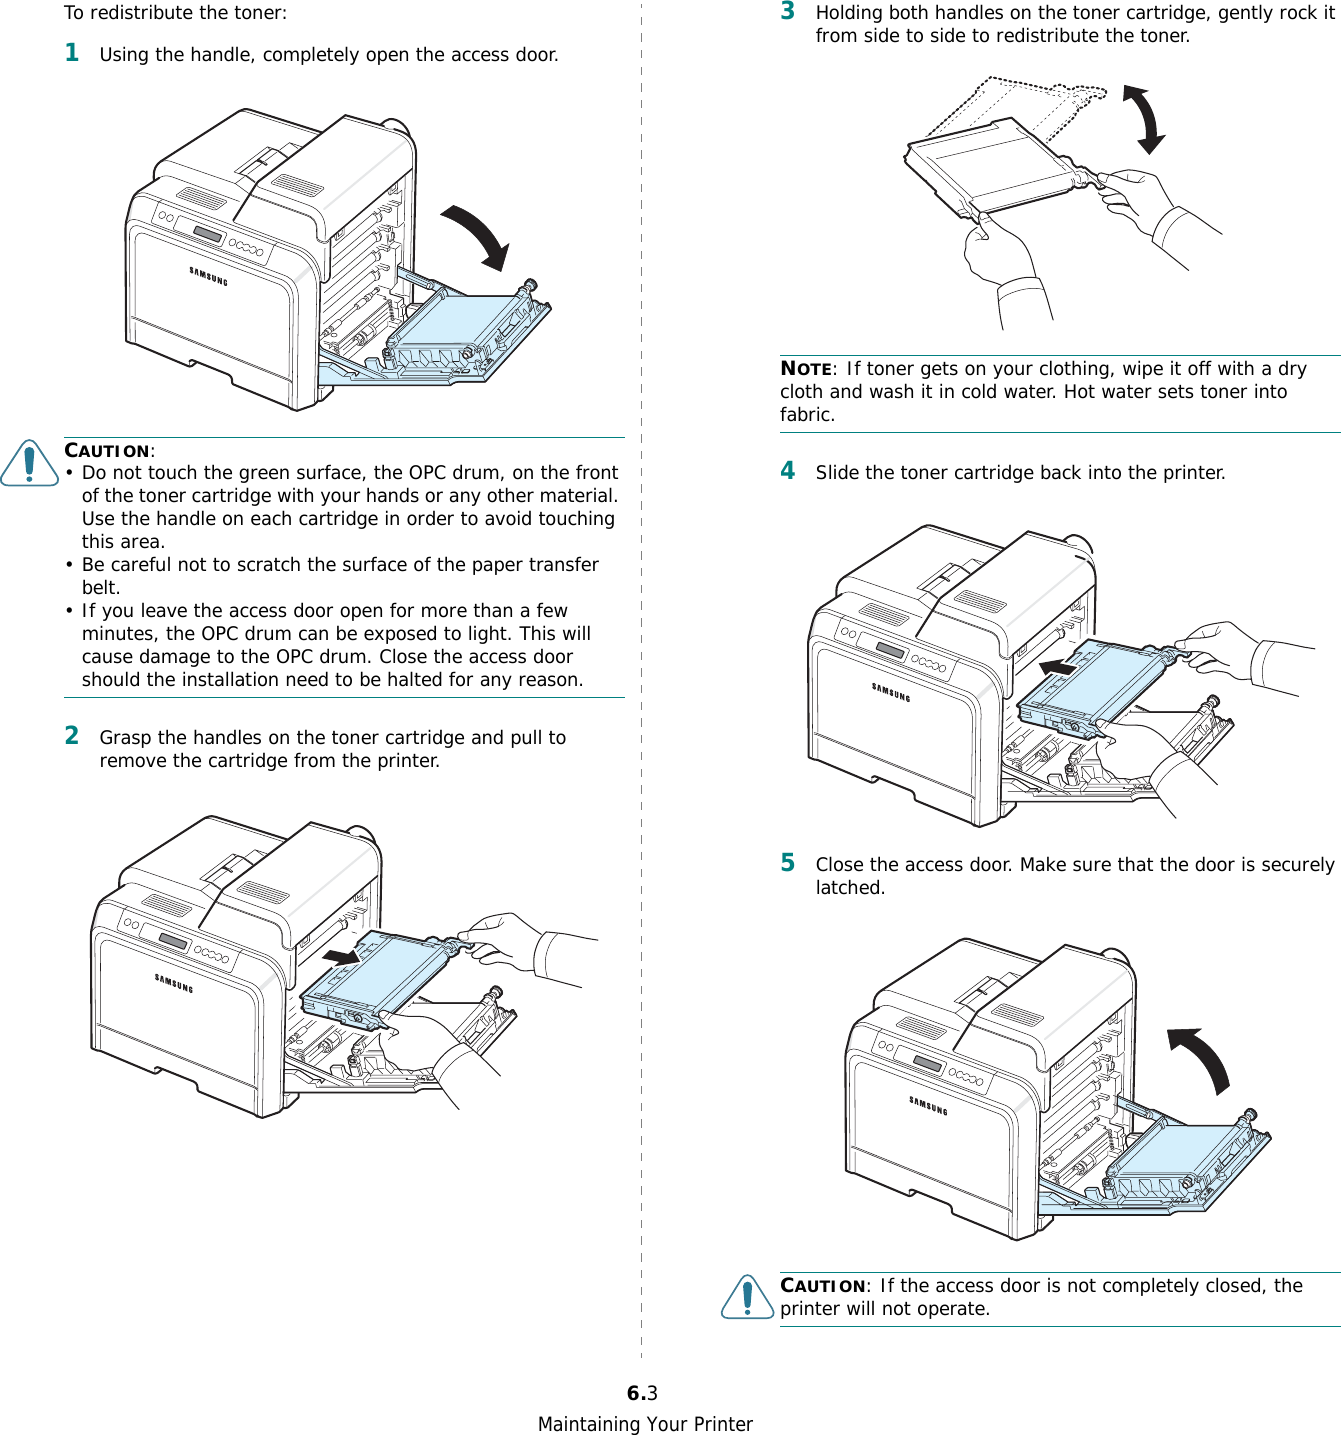 Maintaining Your Printer6.3To redistribute the toner:1Using the handle, completely open the access door.CAUTION:• Do not touch the green surface, the OPC drum, on the front of the toner cartridge with your hands or any other material. Use the handle on each cartridge in order to avoid touching this area.• Be careful not to scratch the surface of the paper transfer belt.• If you leave the access door open for more than a few minutes, the OPC drum can be exposed to light. This will cause damage to the OPC drum. Close the access door should the installation need to be halted for any reason.2Grasp the handles on the toner cartridge and pull to remove the cartridge from the printer.3Holding both handles on the toner cartridge, gently rock it from side to side to redistribute the toner. NOTE: If toner gets on your clothing, wipe it off with a dry cloth and wash it in cold water. Hot water sets toner into fabric.4Slide the toner cartridge back into the printer.5Close the access door. Make sure that the door is securely latched.CAUTION: If the access door is not completely closed, the printer will not operate.